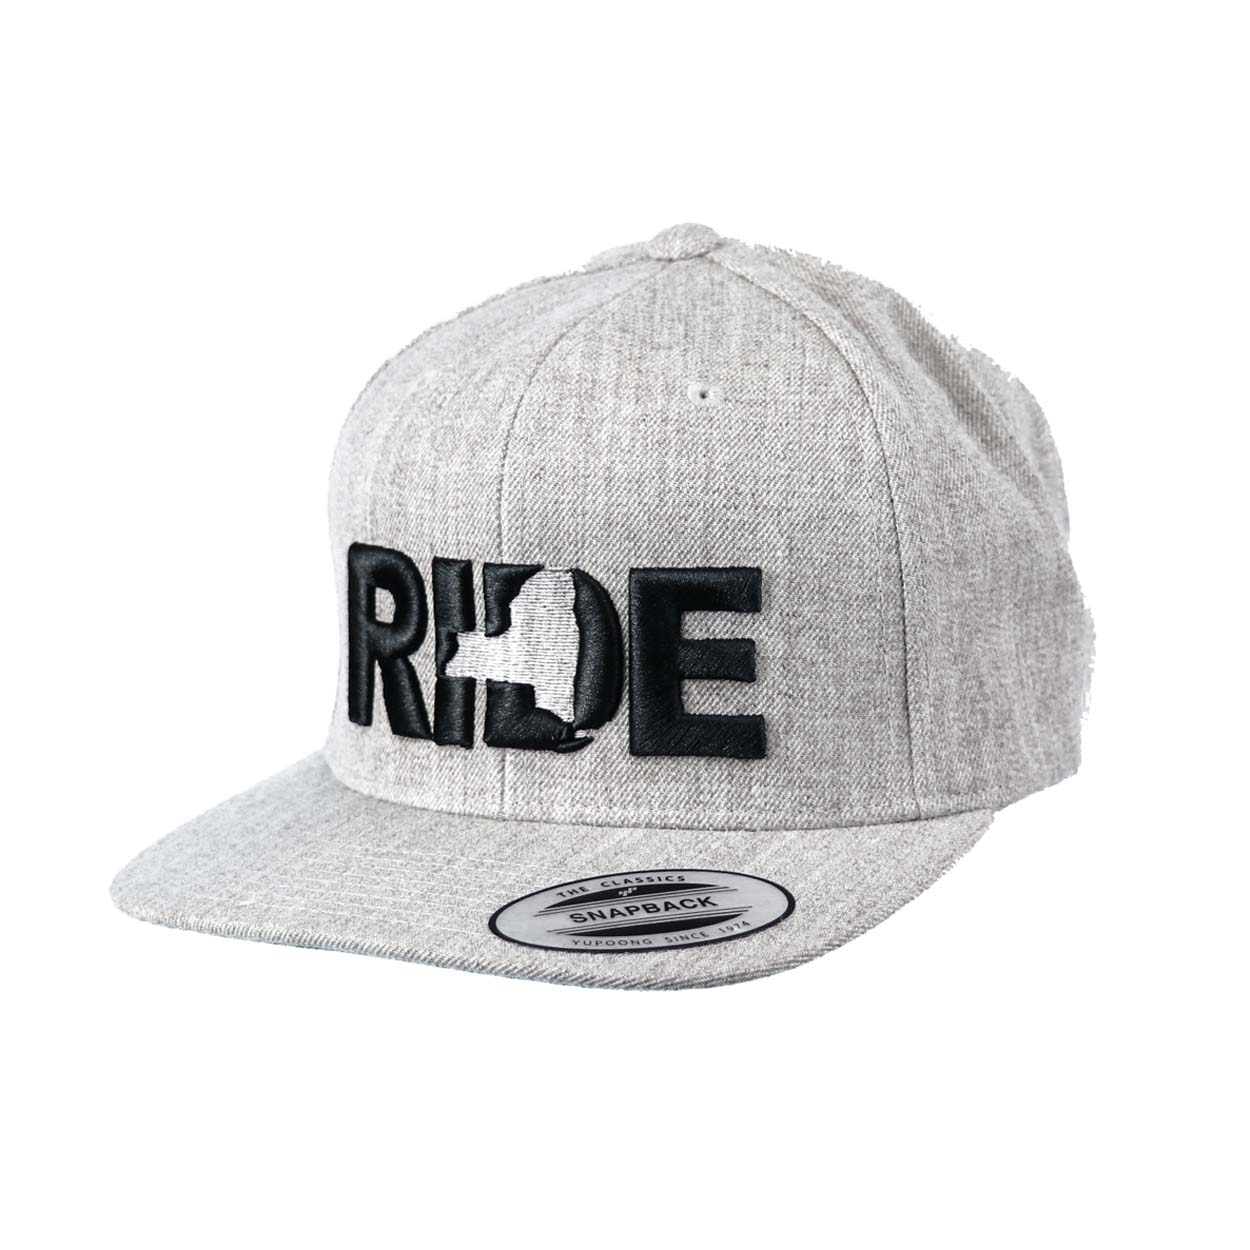 Ride New York Classic Pro 3D Puff Embroidered Snapback Flat Brim Hat Heather Gray